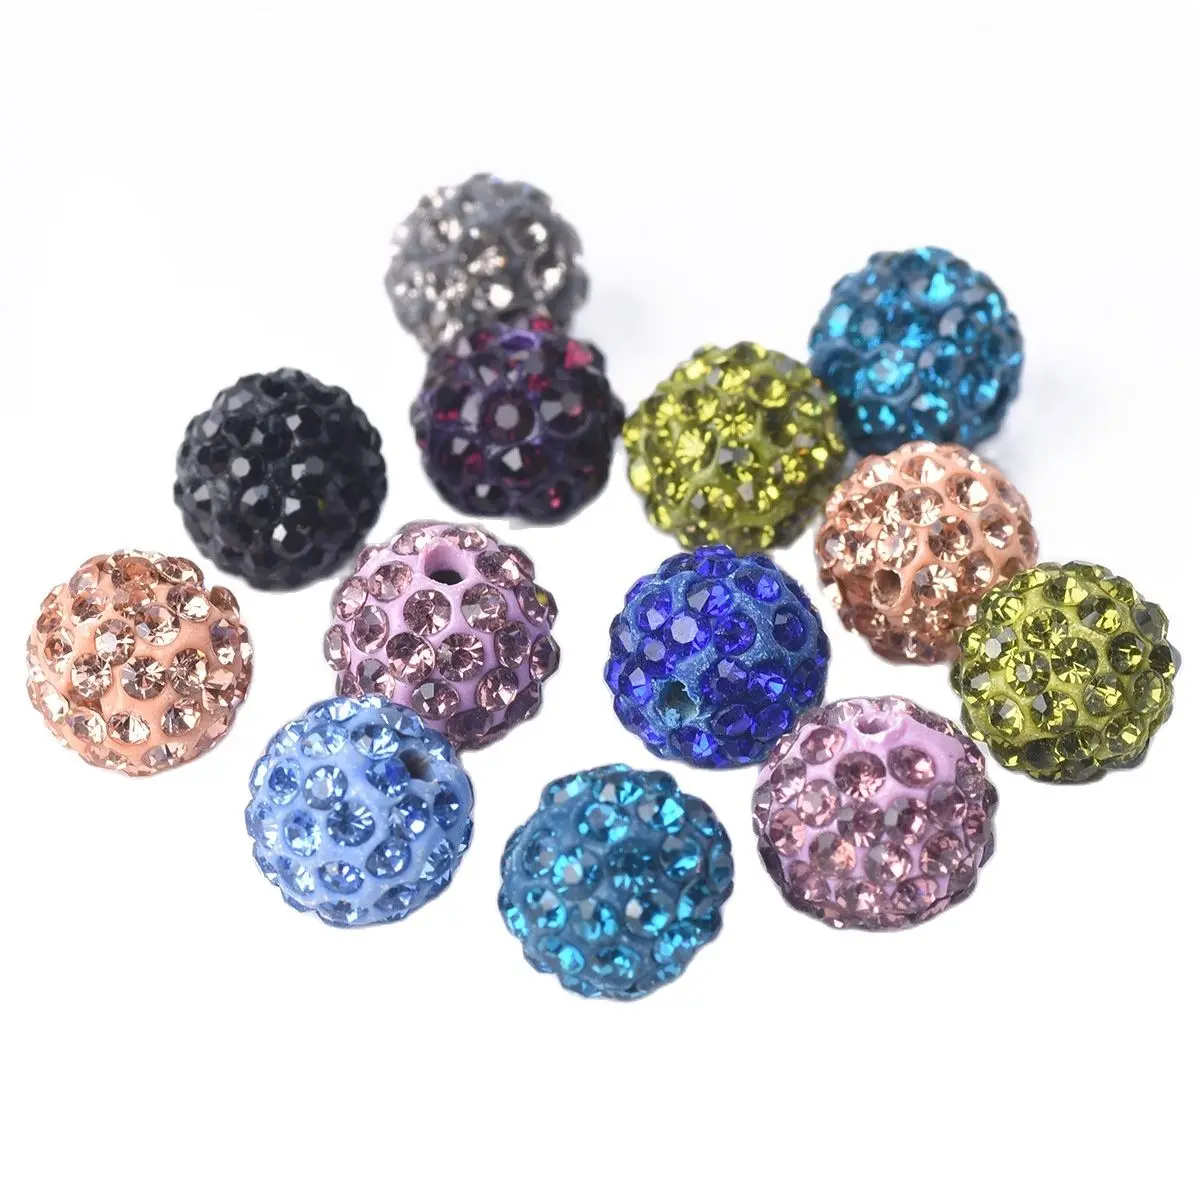 10pcs 10mm Random Mixed Colors Round Crystal Glass Ball & Cray Loose Beads for Jewelry Making DIY Crafts Findings блокнот склейка clairefontaine cray on а3 50 л 120 г мелкозернистый